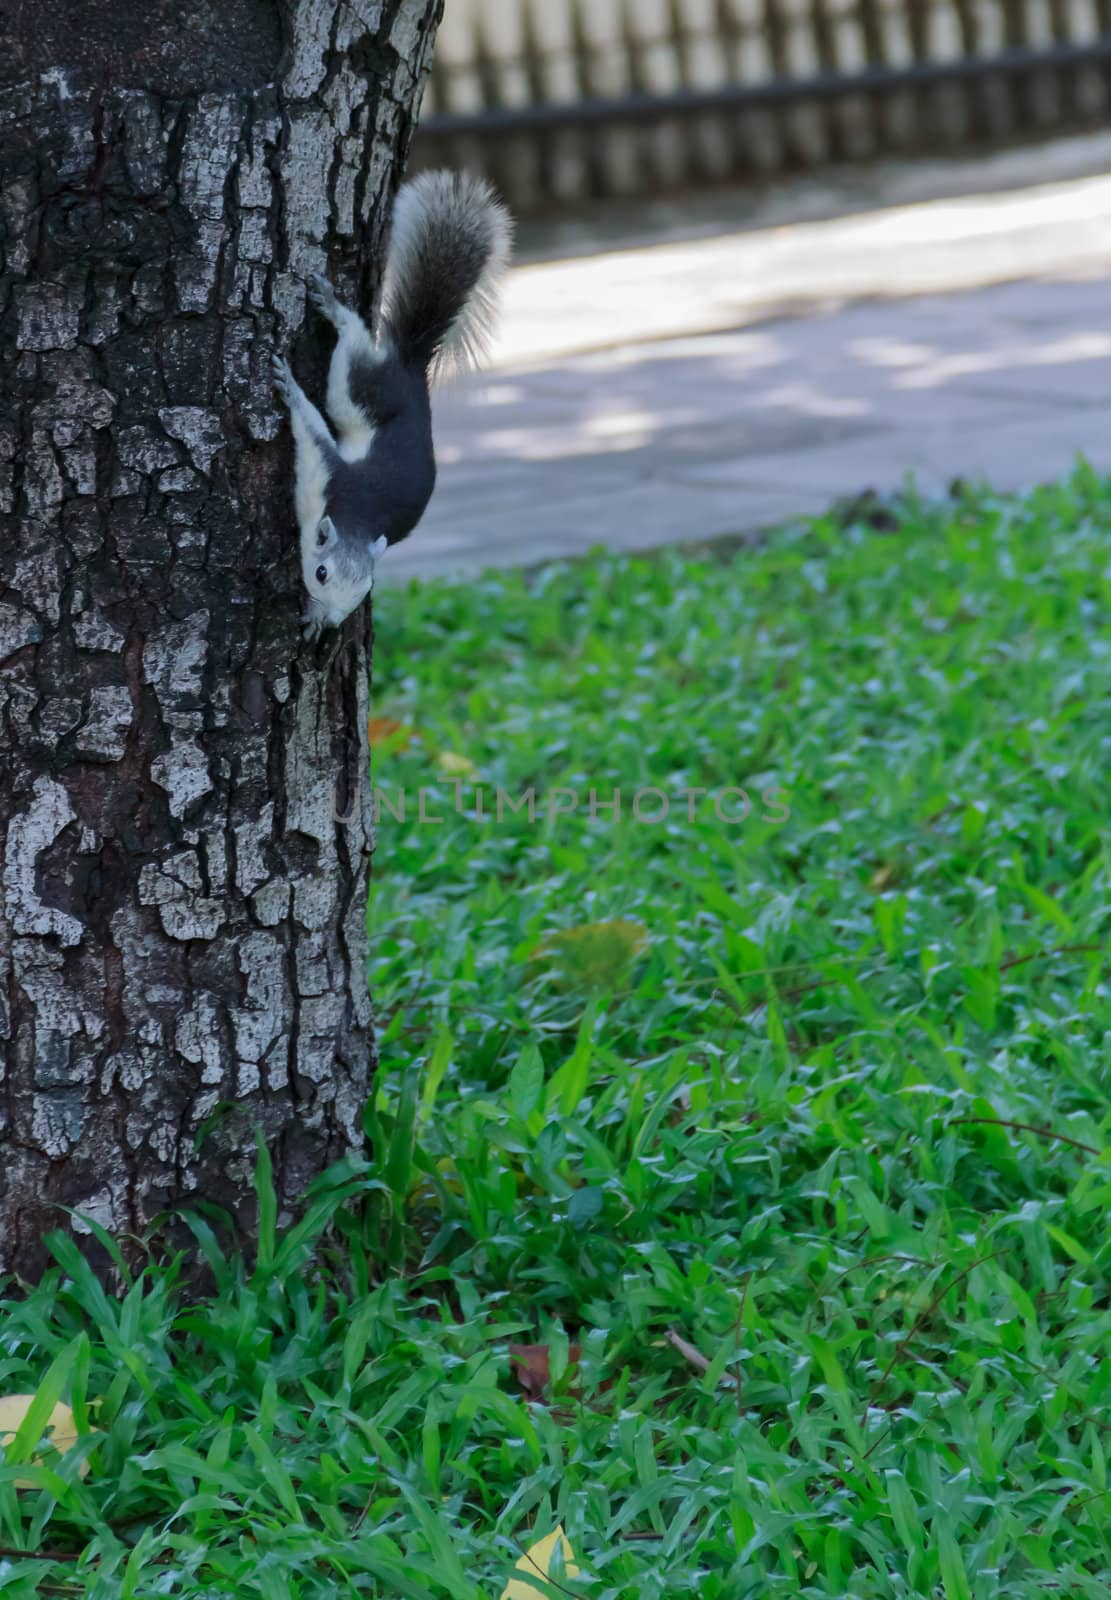 Small Squirrel Climbing Down from the Tree.